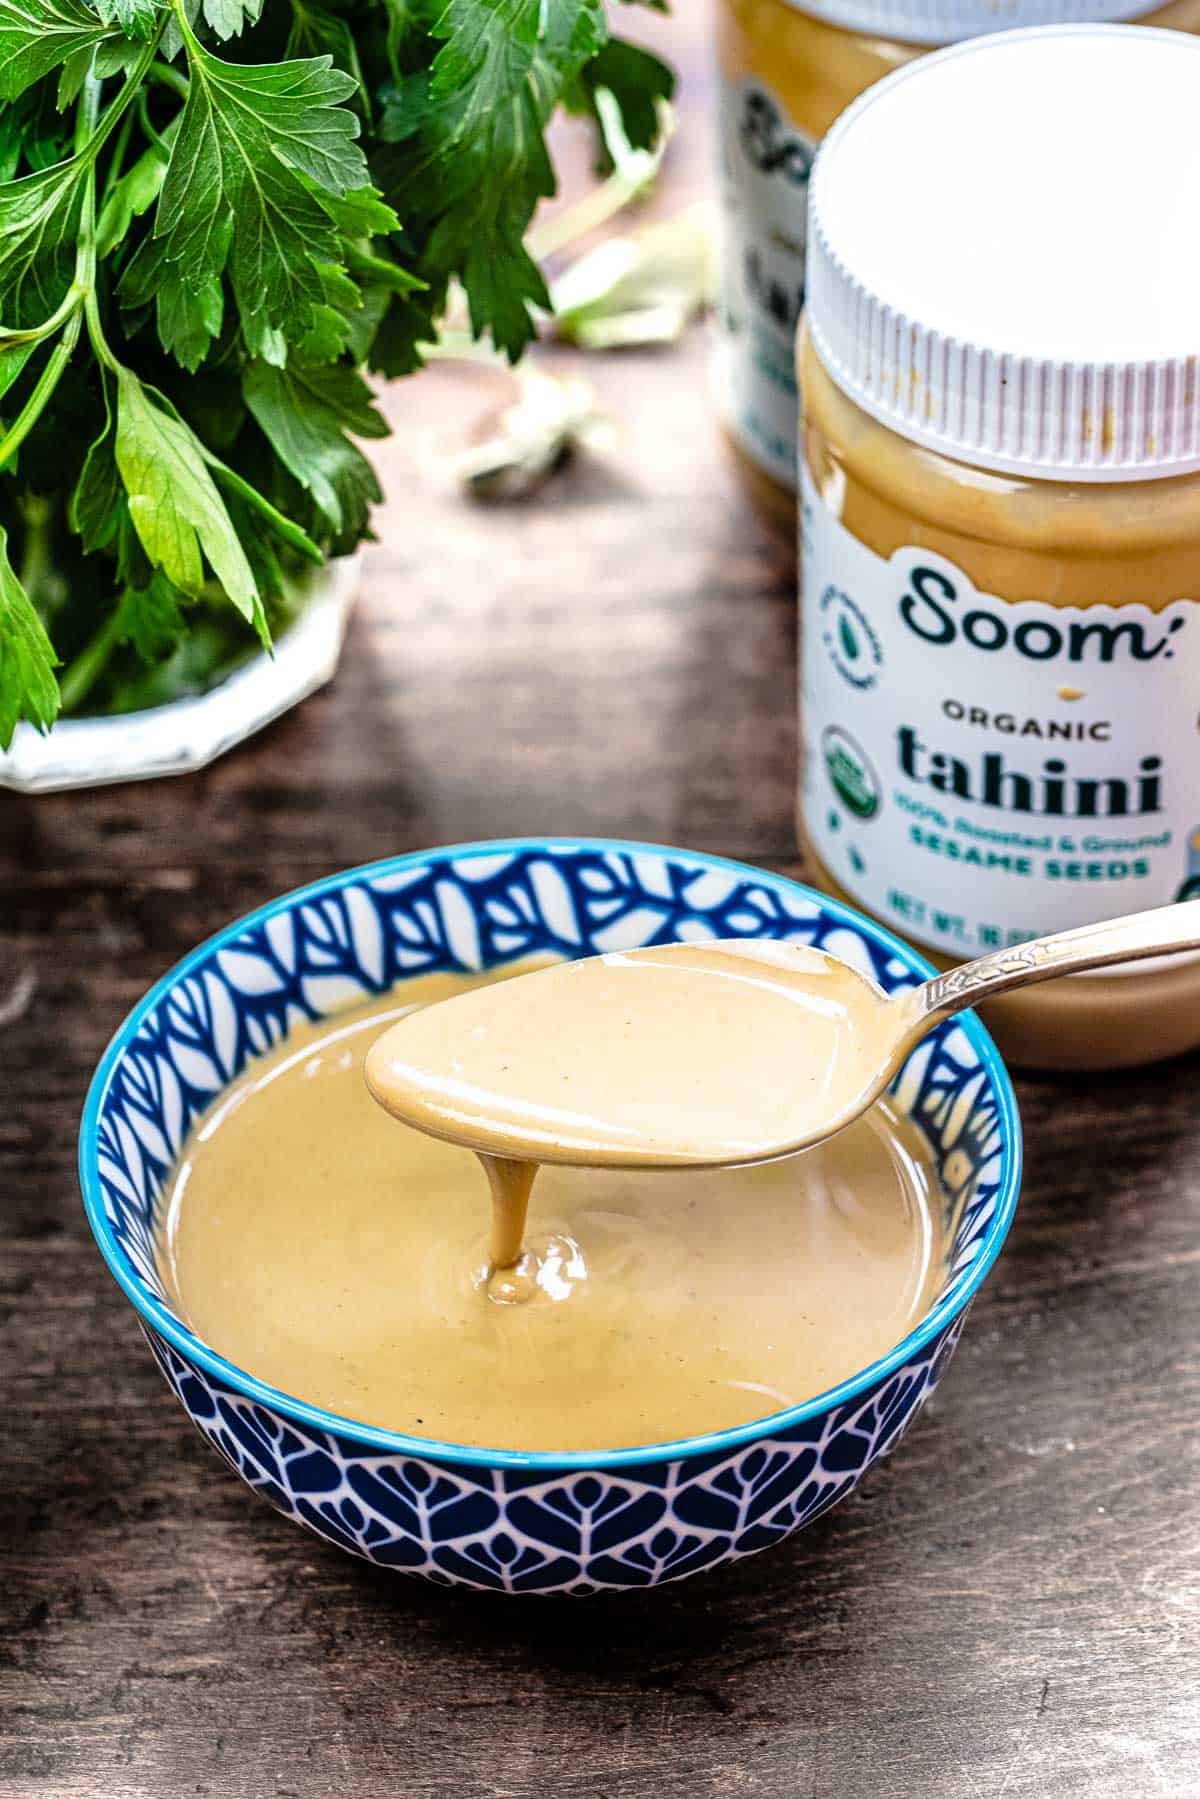 What Is Tahini, and What Is It Made From?